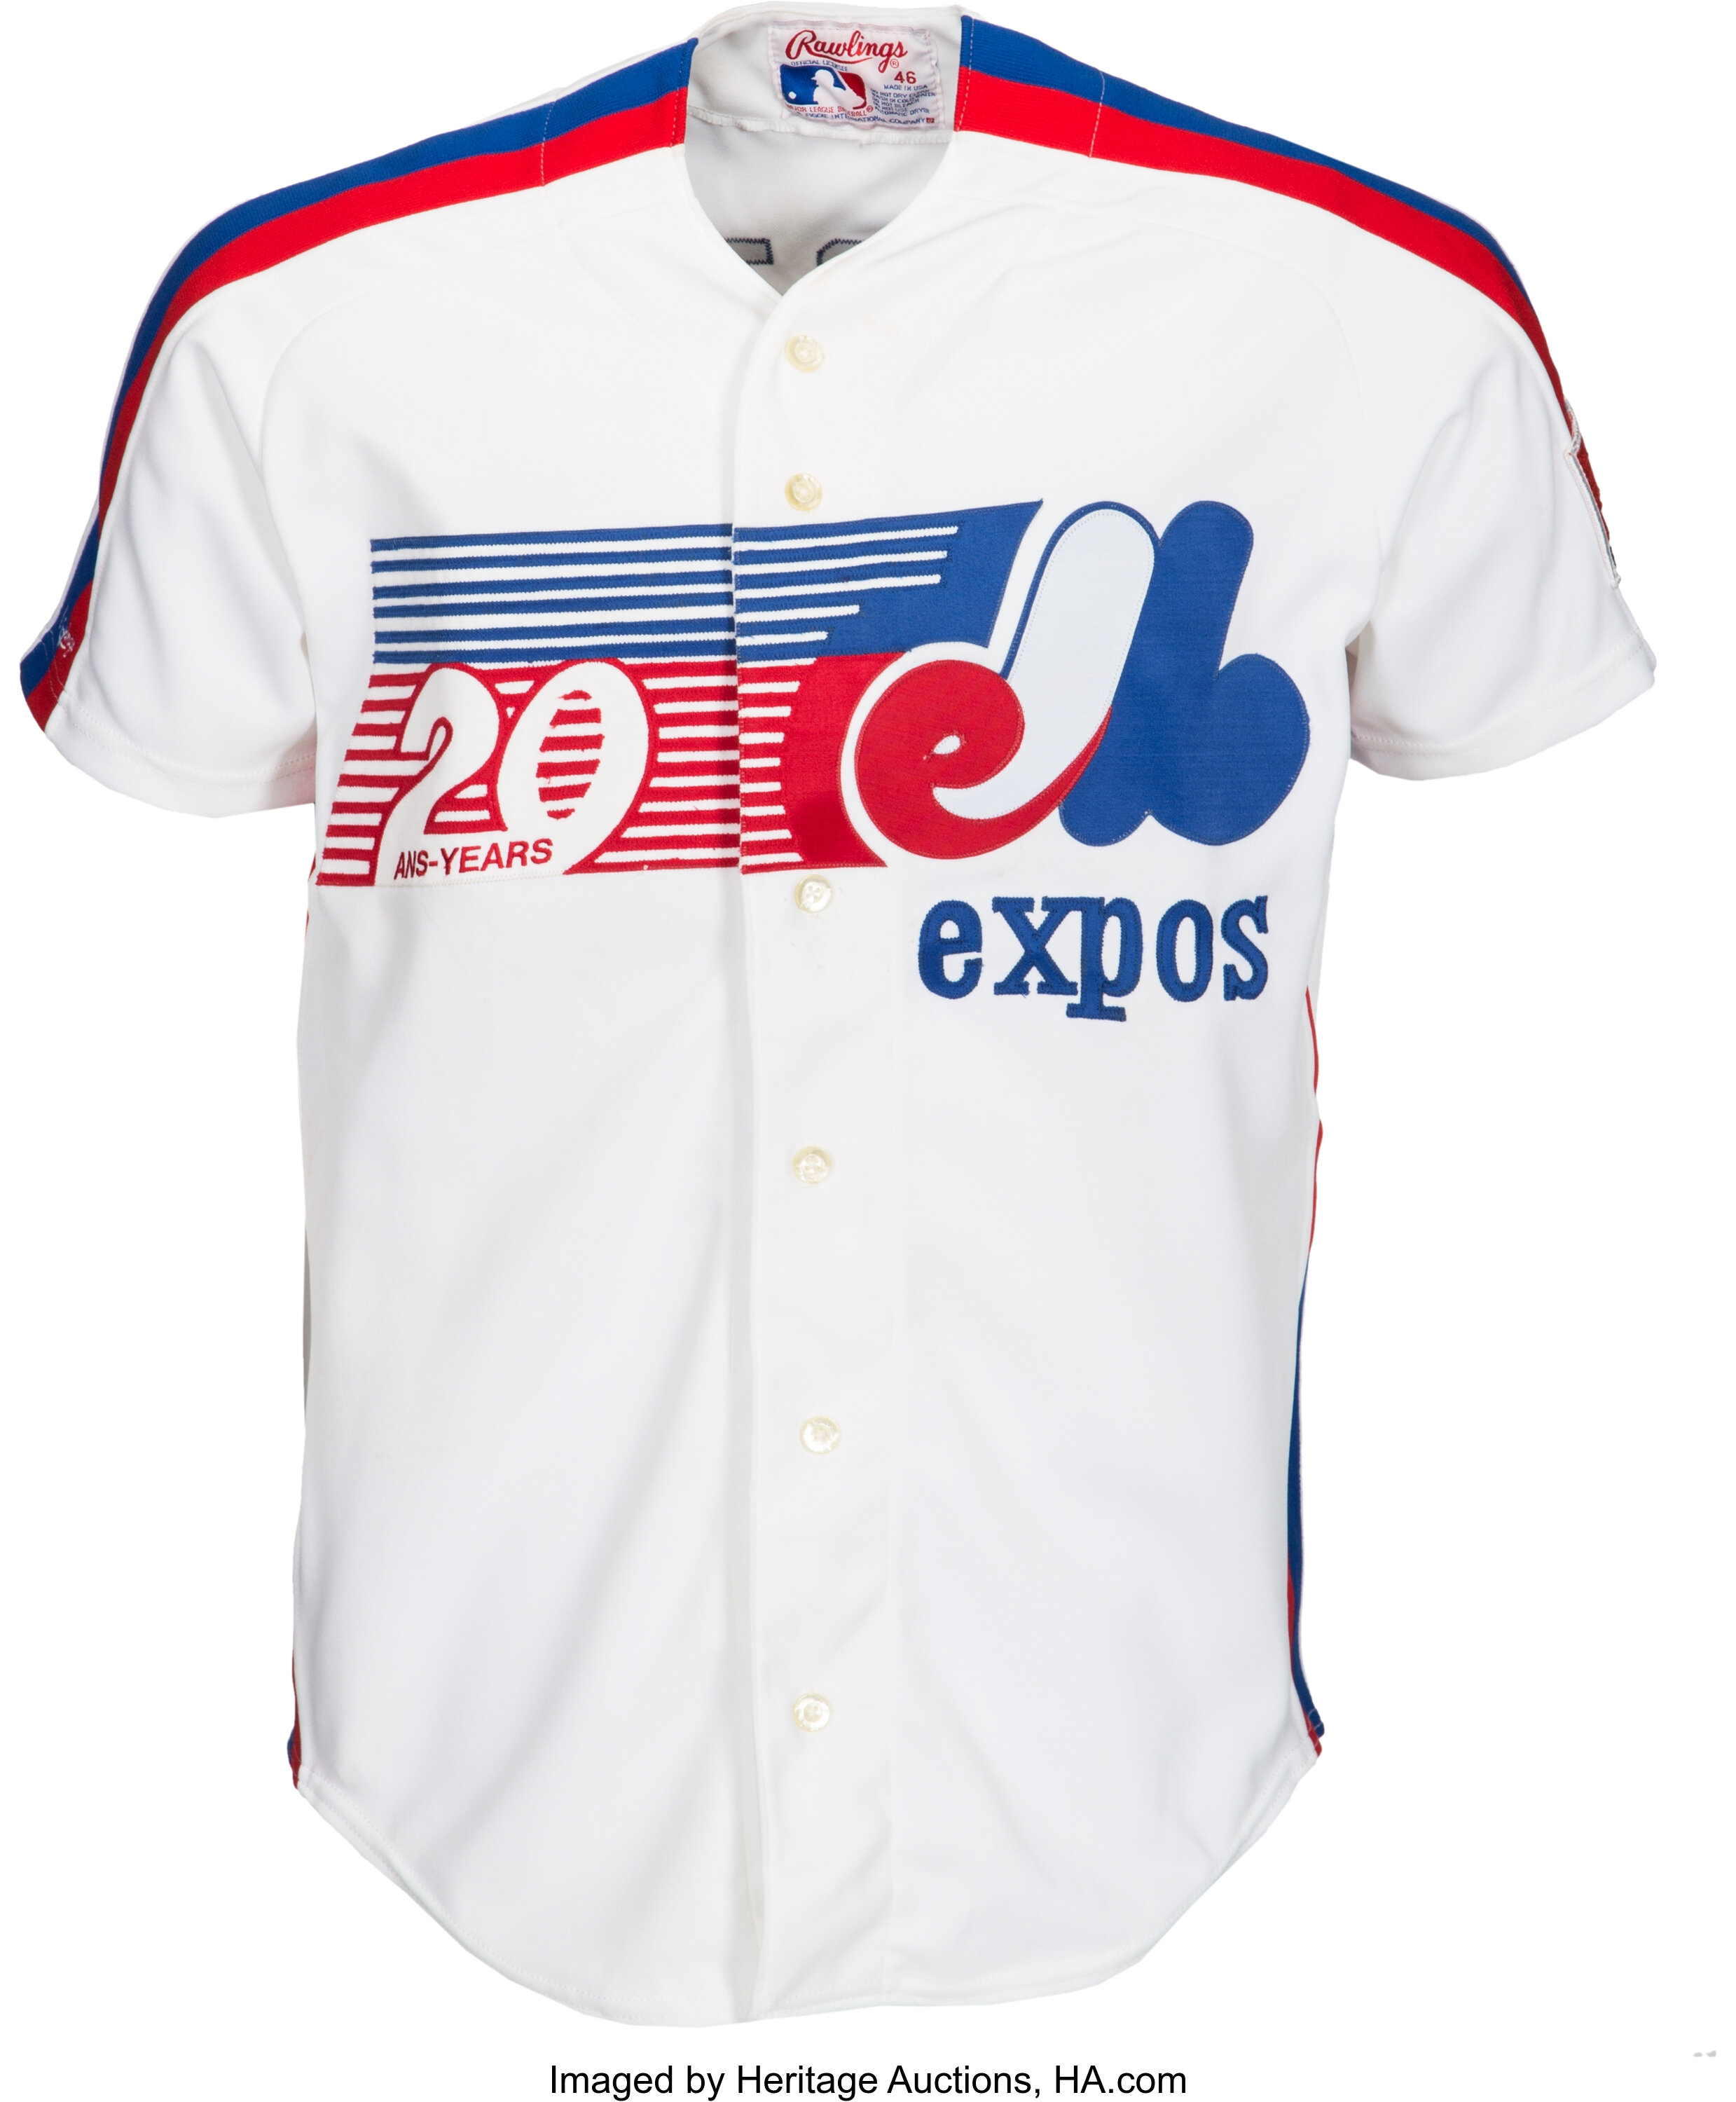 1988 Gary Carter Equitable Old-Timers' Game Worn Uniform from The